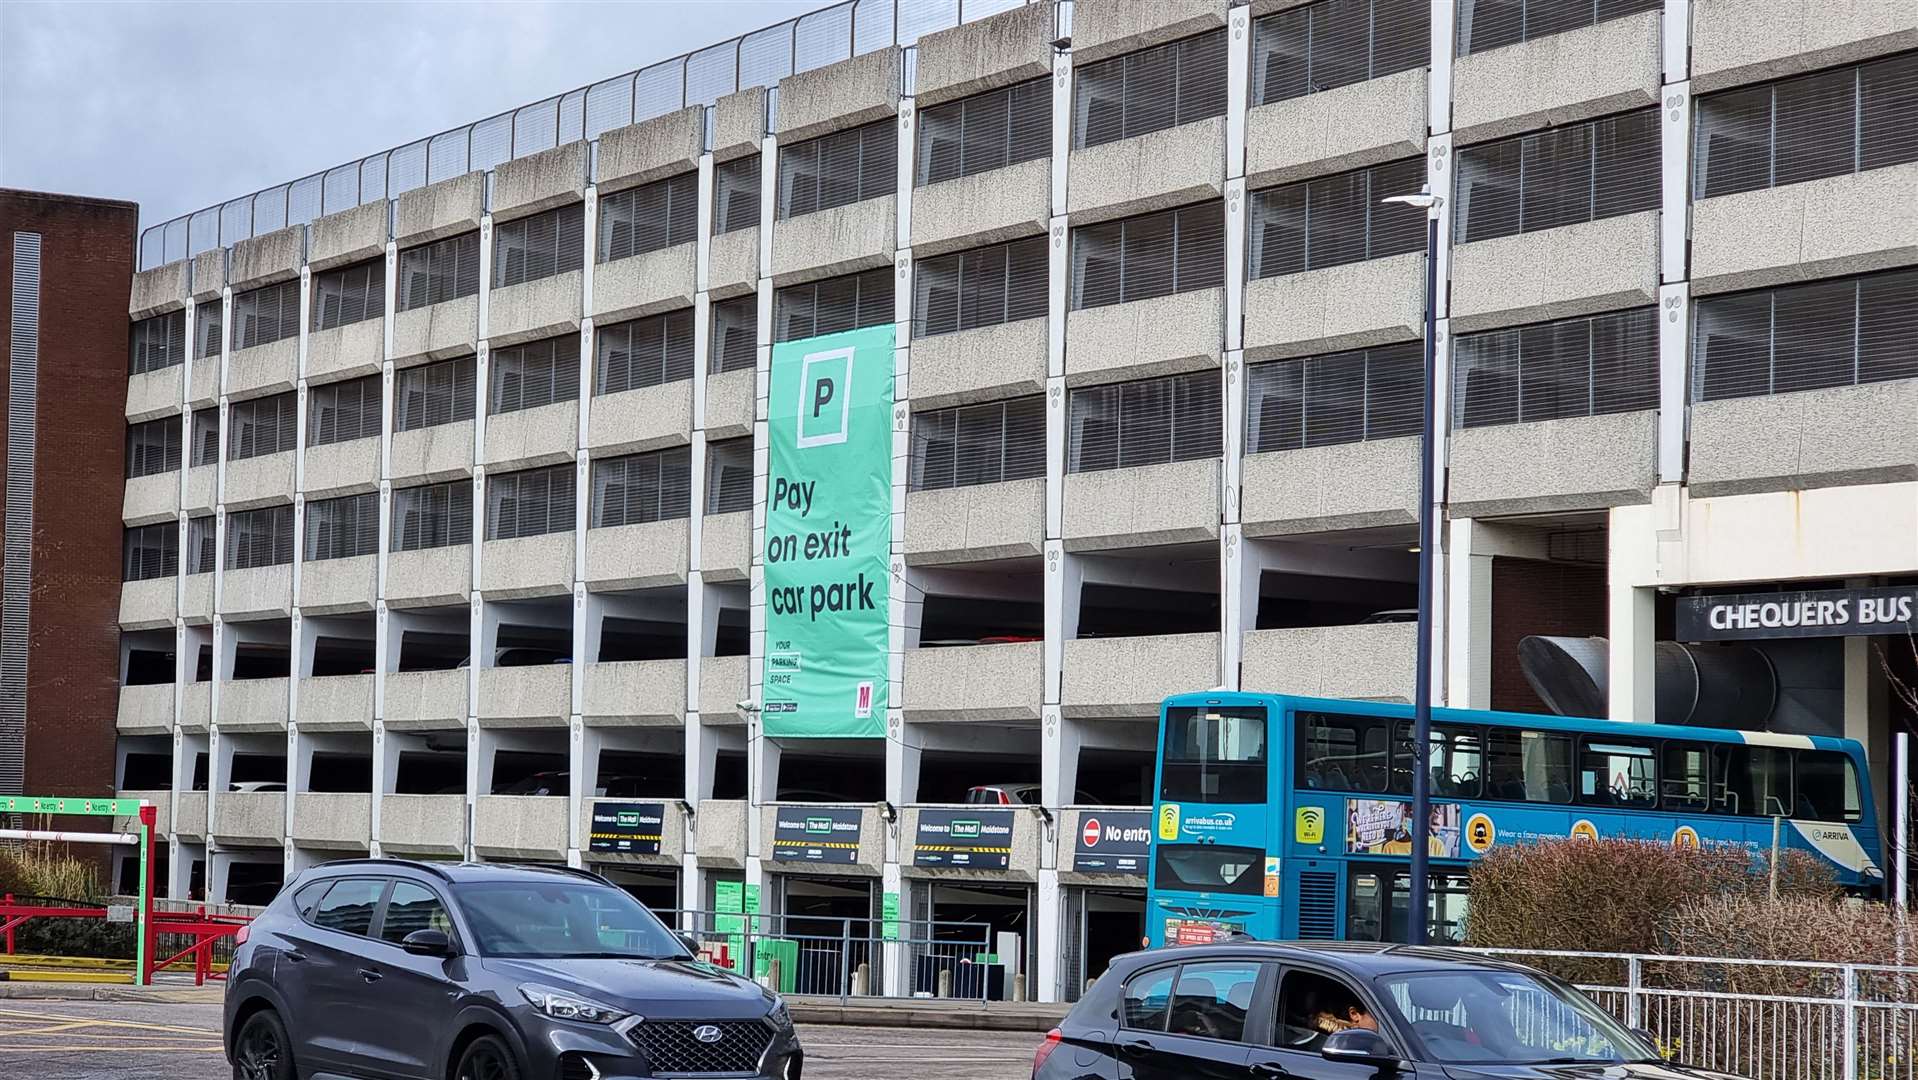 Ues yourparkingspace.co.uk to park at the Mall, Maidstone